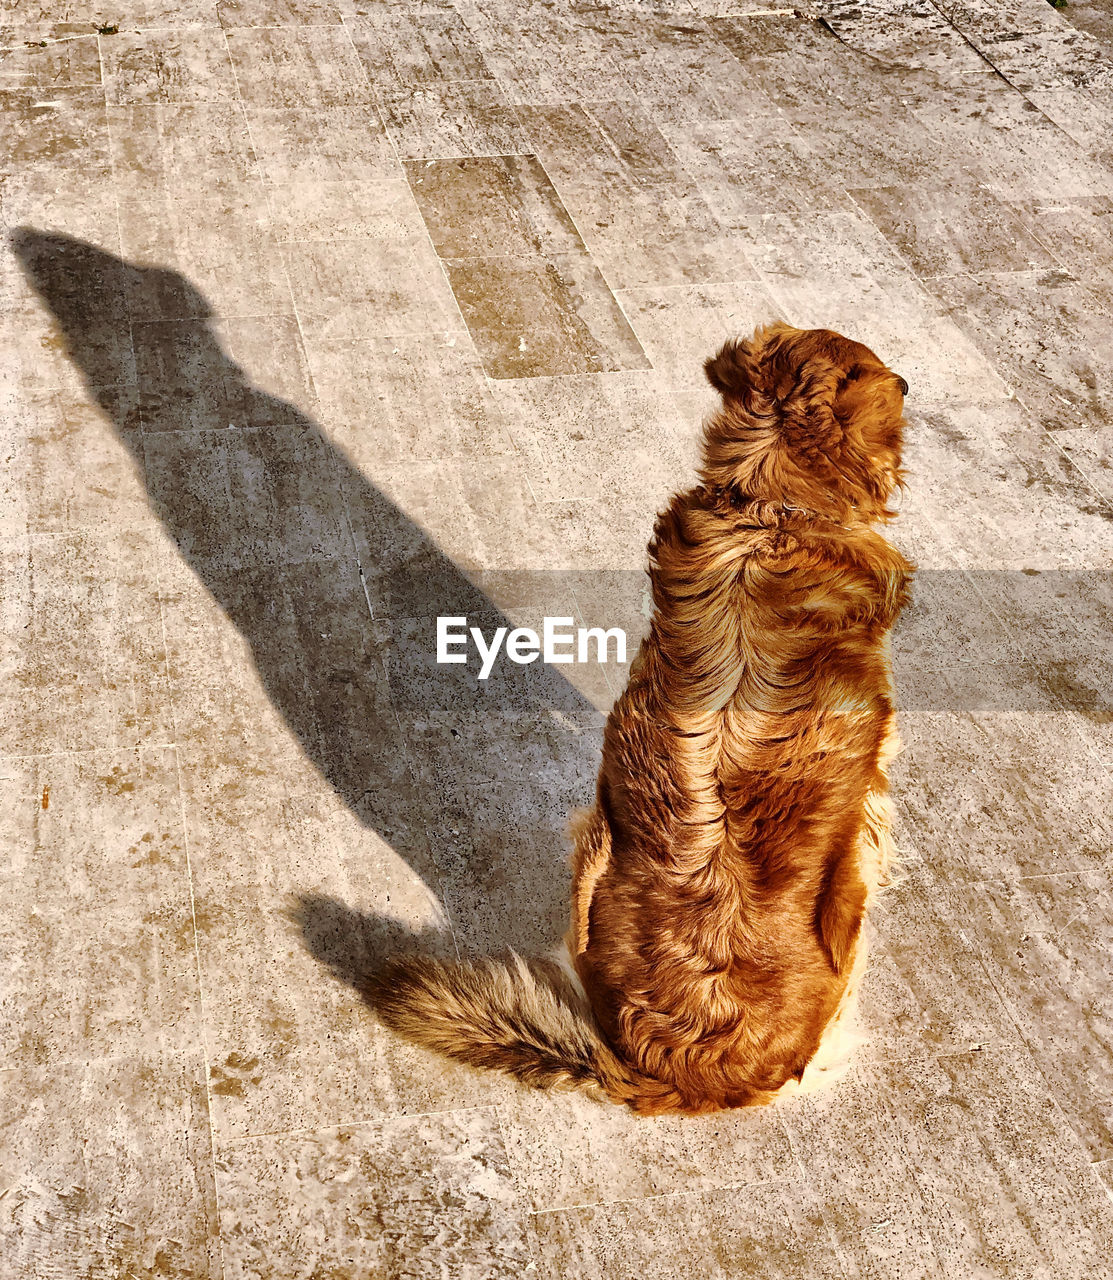 HIGH ANGLE VIEW OF A DOG ON SHADOW OF PERSON